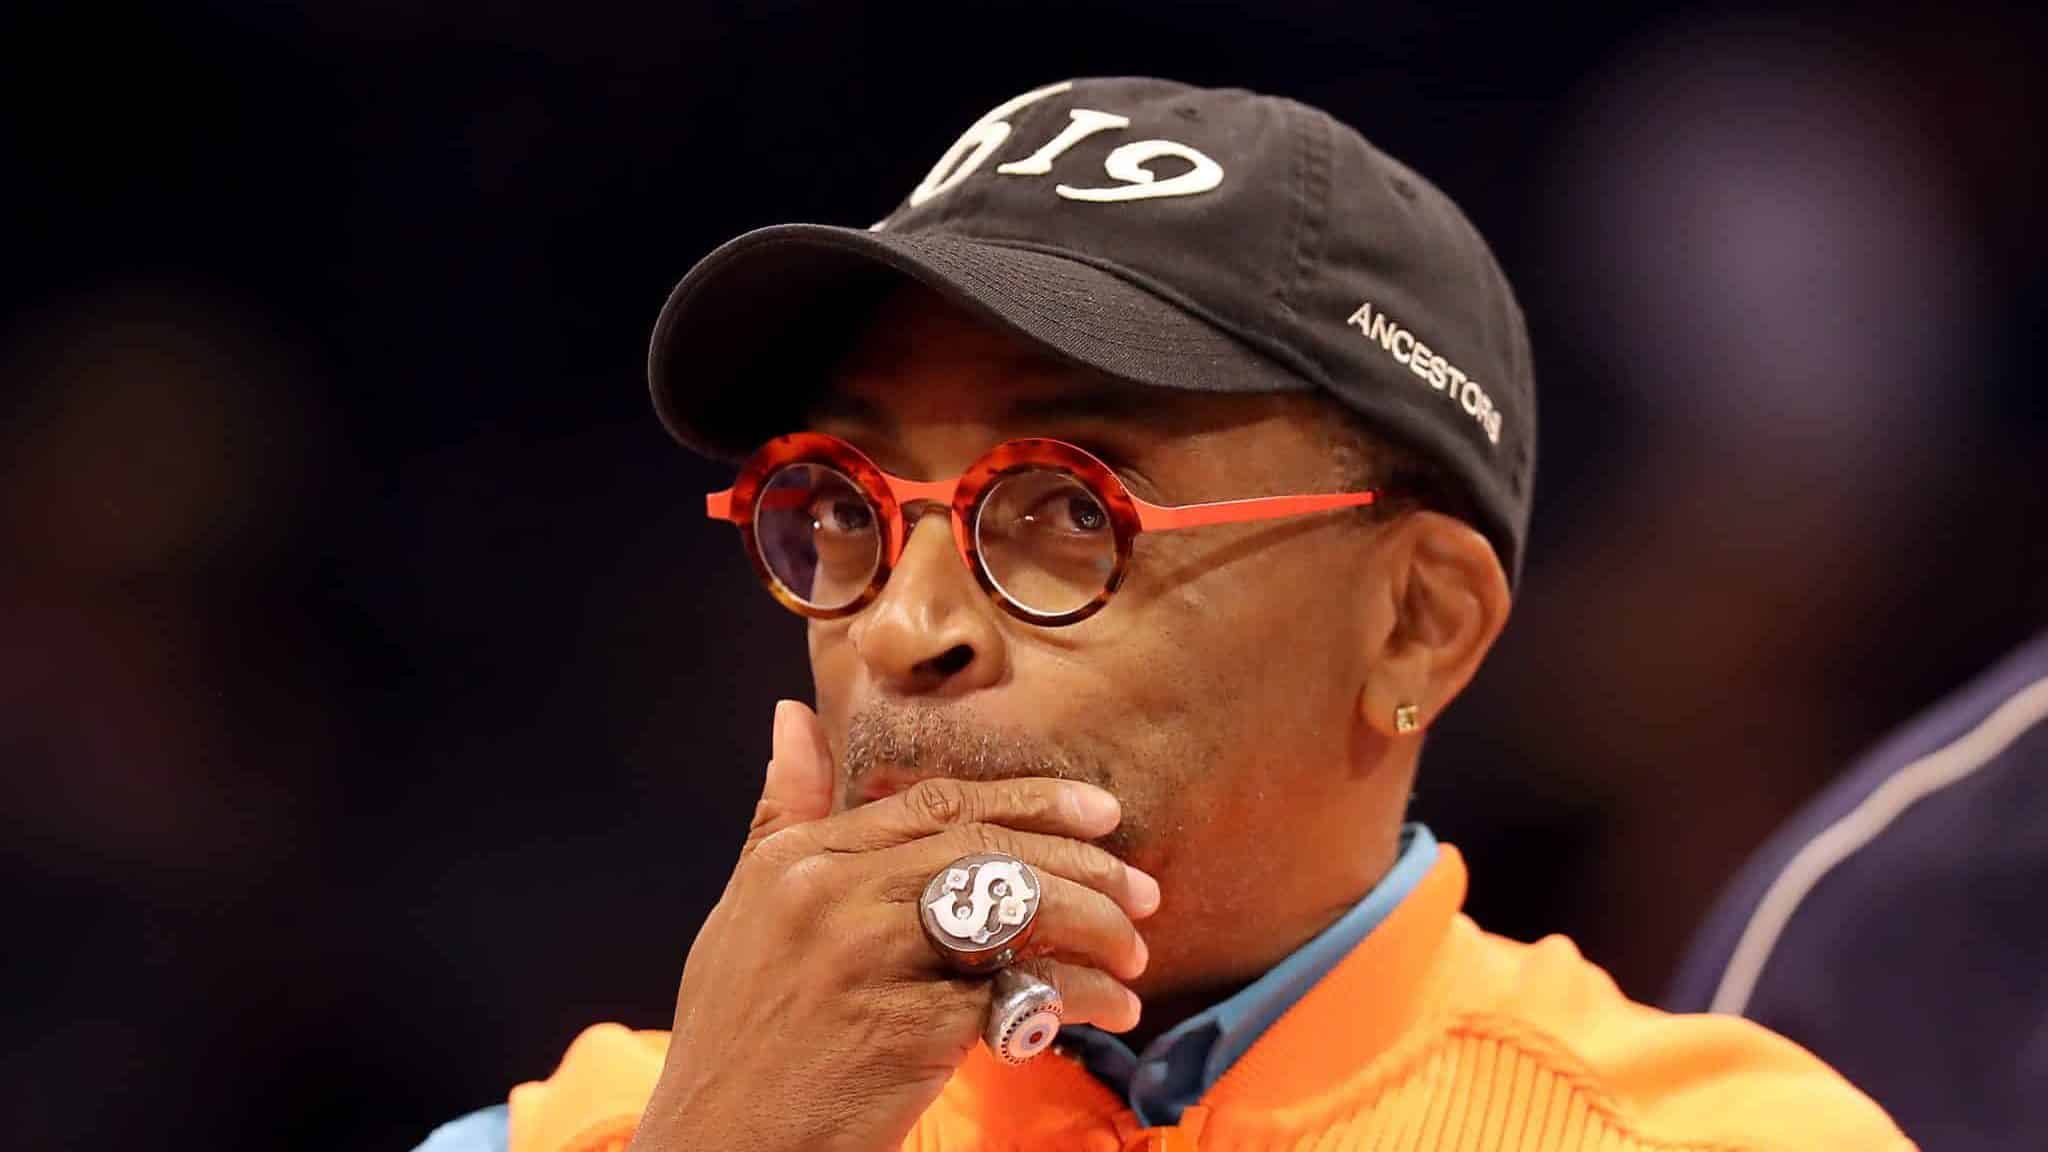 CHARLOTTE, NORTH CAROLINA - FEBRUARY 16: Spike Lee, film director, attends the Taco Bell Skills Challenge as part of the 2019 NBA All-Star Weekend at Spectrum Center on February 16, 2019 in Charlotte, North Carolina.